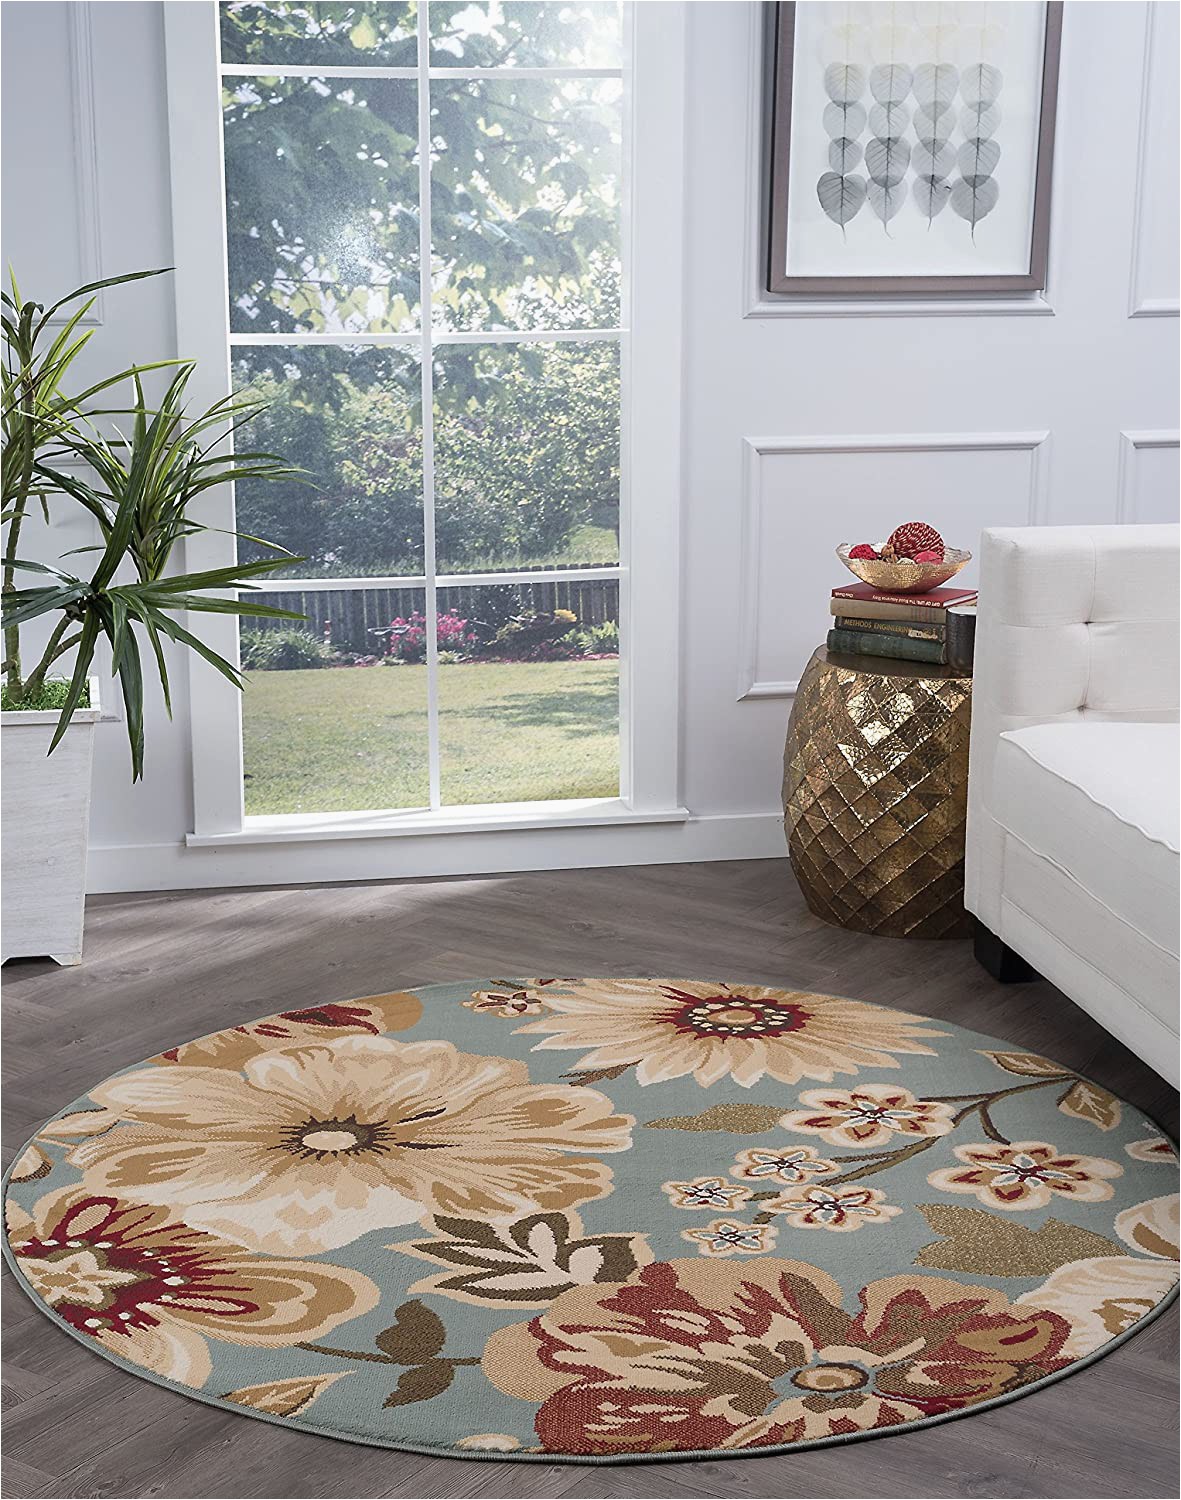 3 Foot Round area Rugs Buy 5 3 Round Universal Rugs Transitional Floral 5 Ft 3